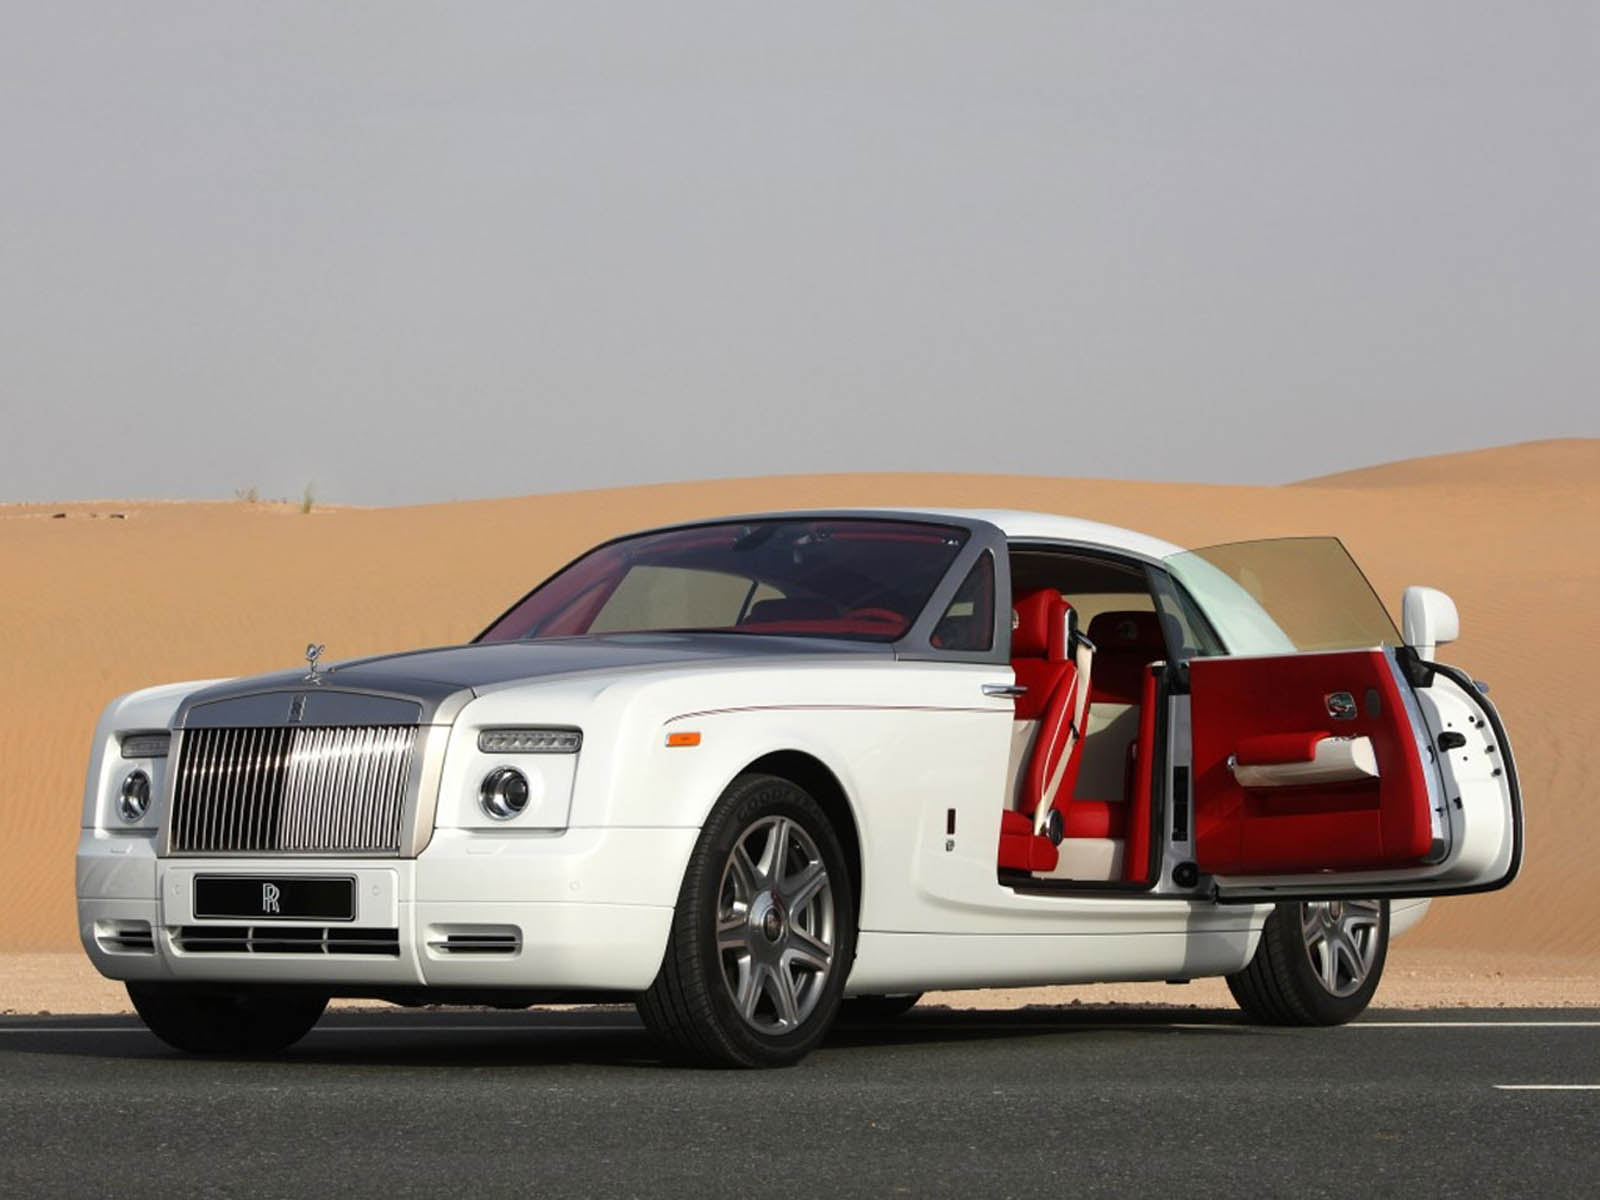 wallpapers: Rolls Royce Phantom Coupe Car Wallpapers